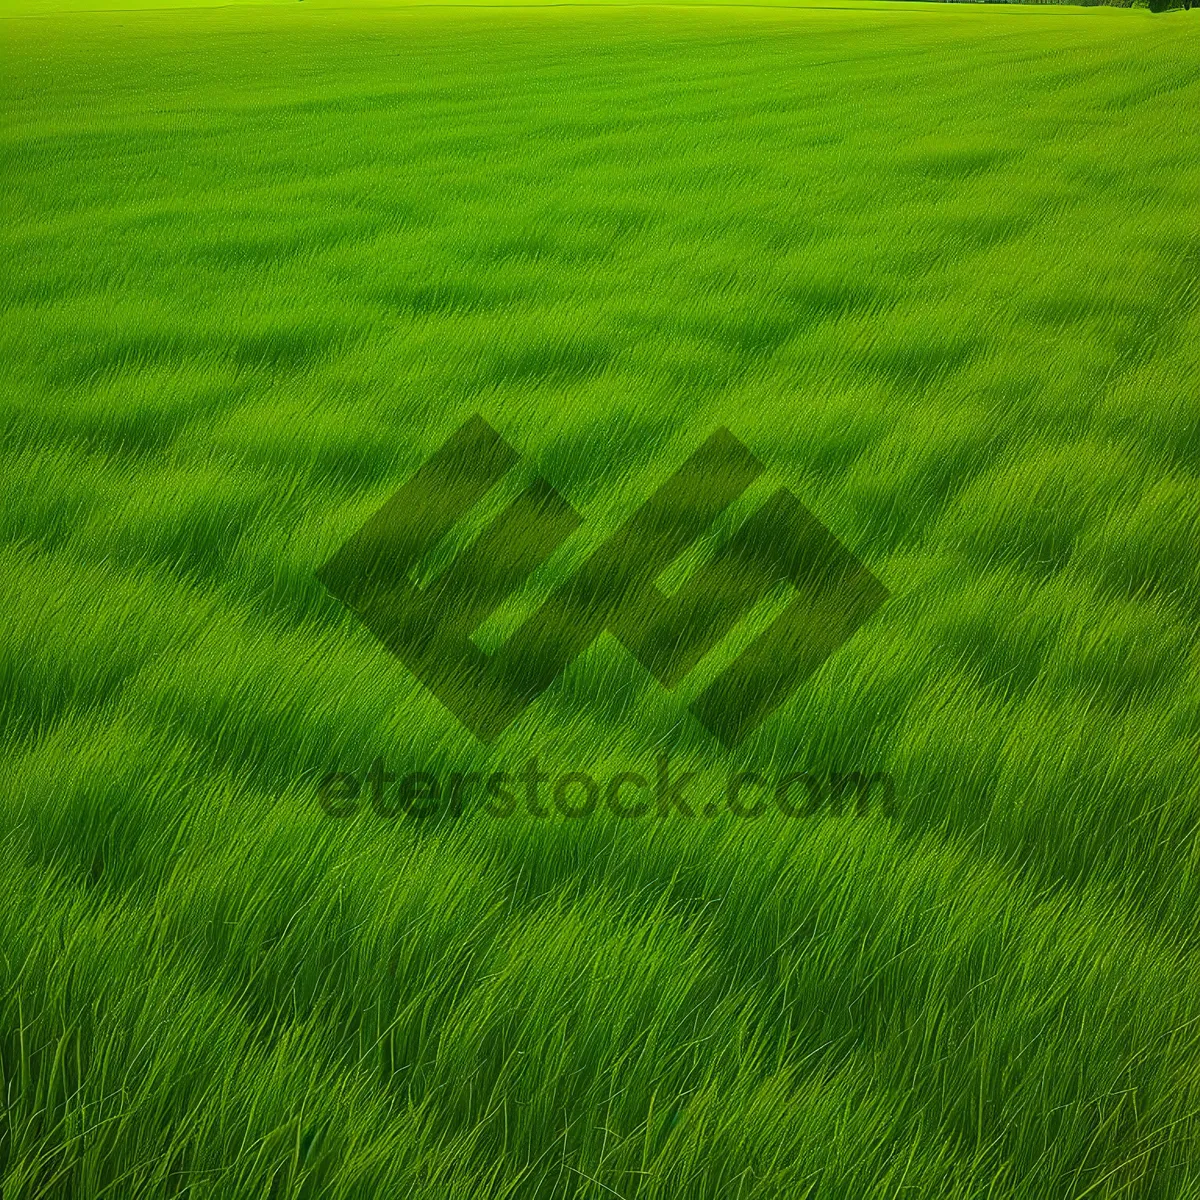 Picture of Verdant countryside expanse with lush grass.